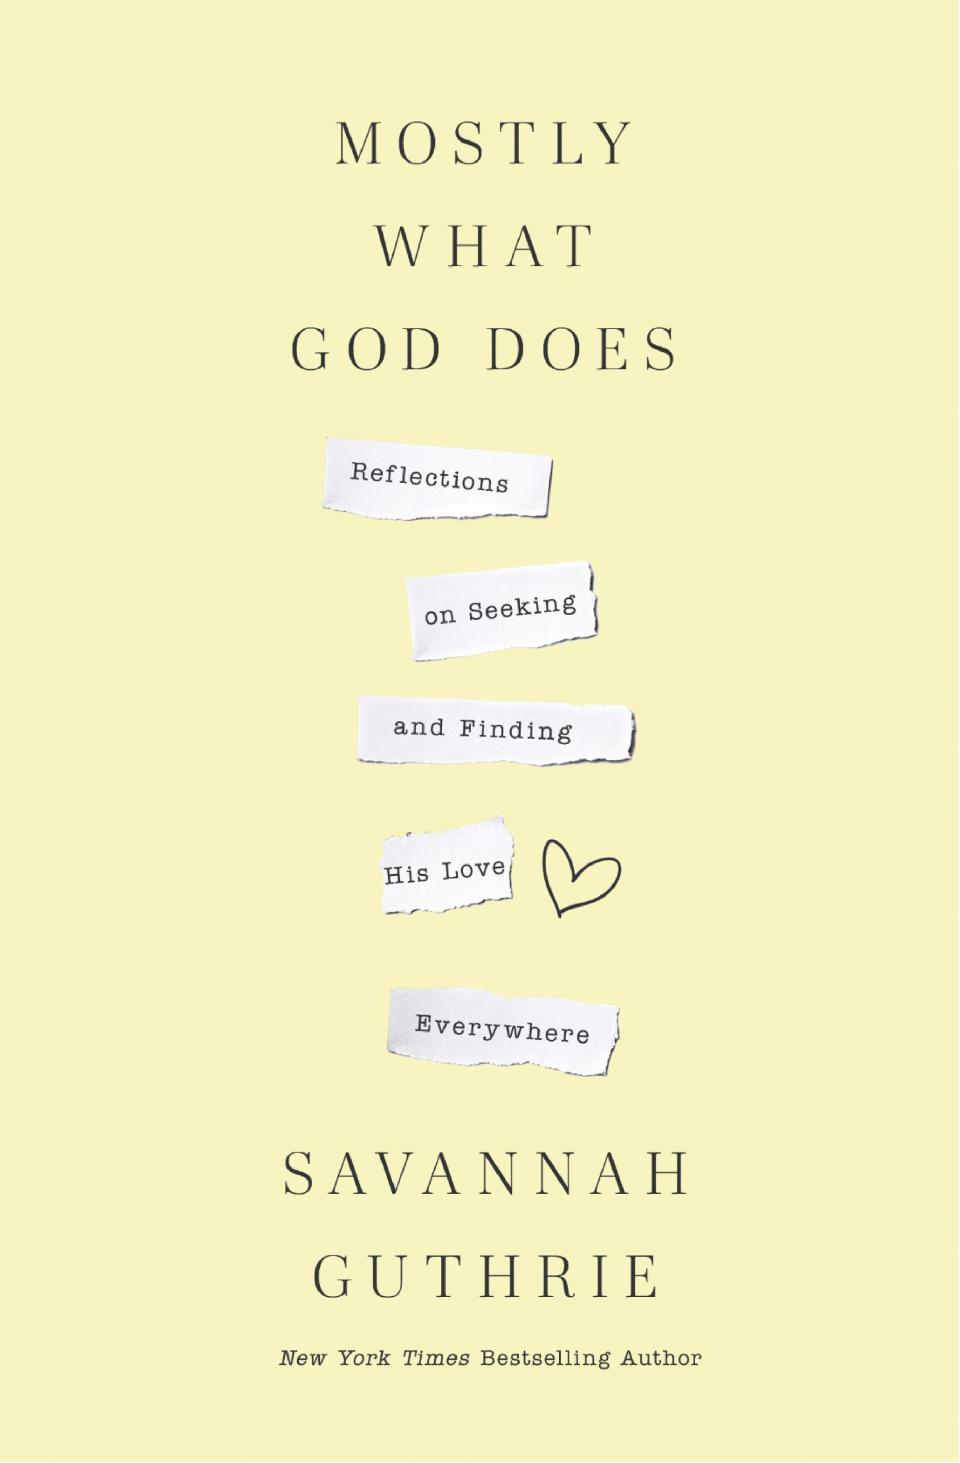 The cover of Savannah Guthrie's new book, "Mostly What God Does."